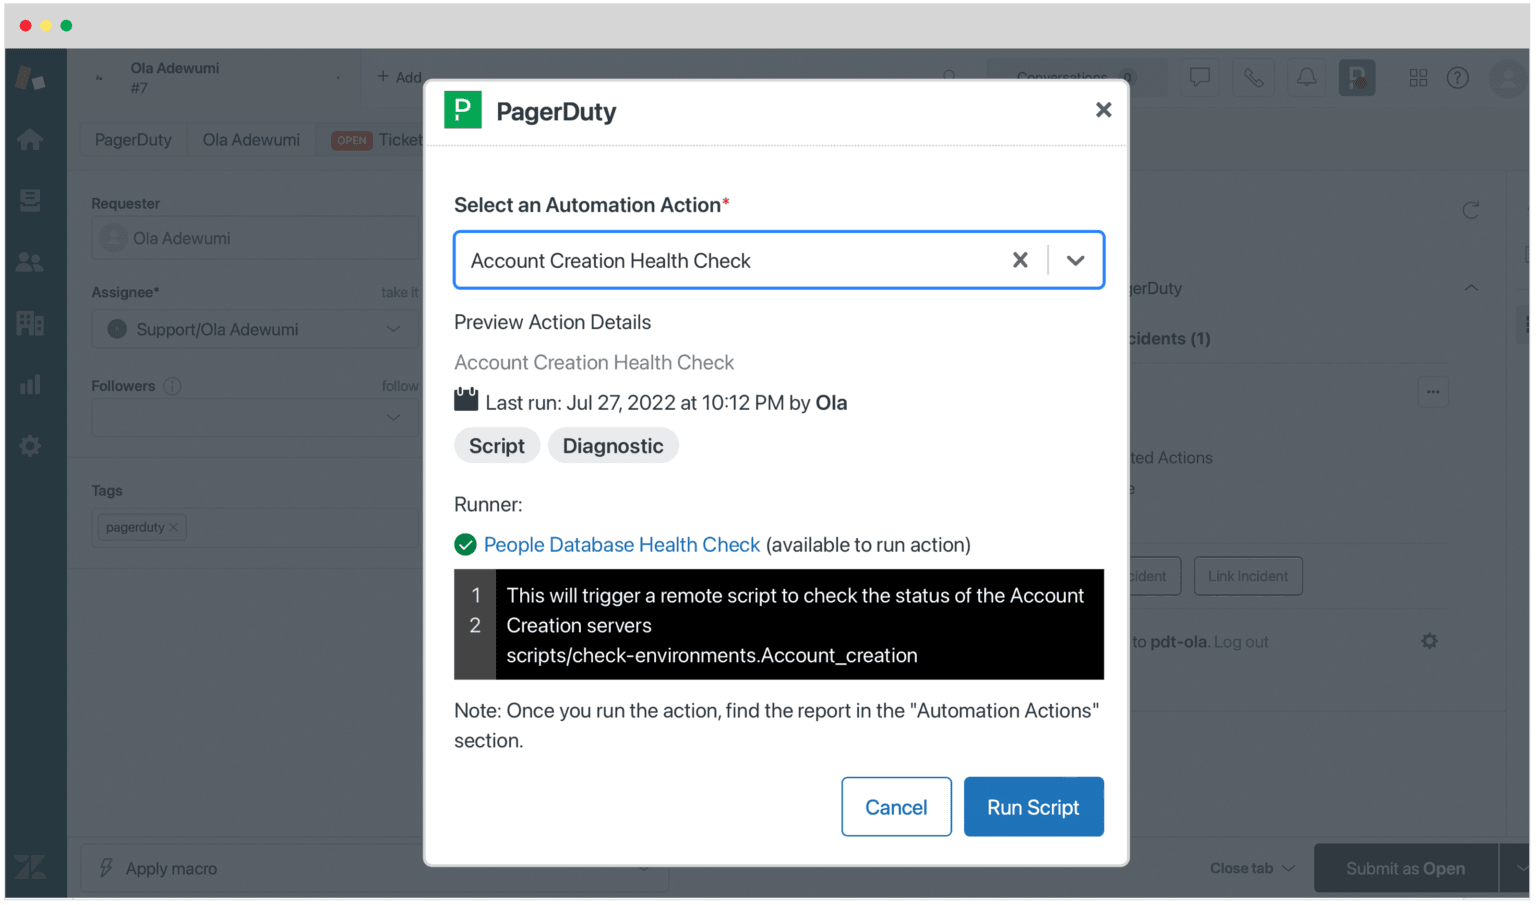 pagerduty-app-for-zendesk-automation-actions-run-script-1536x905.png